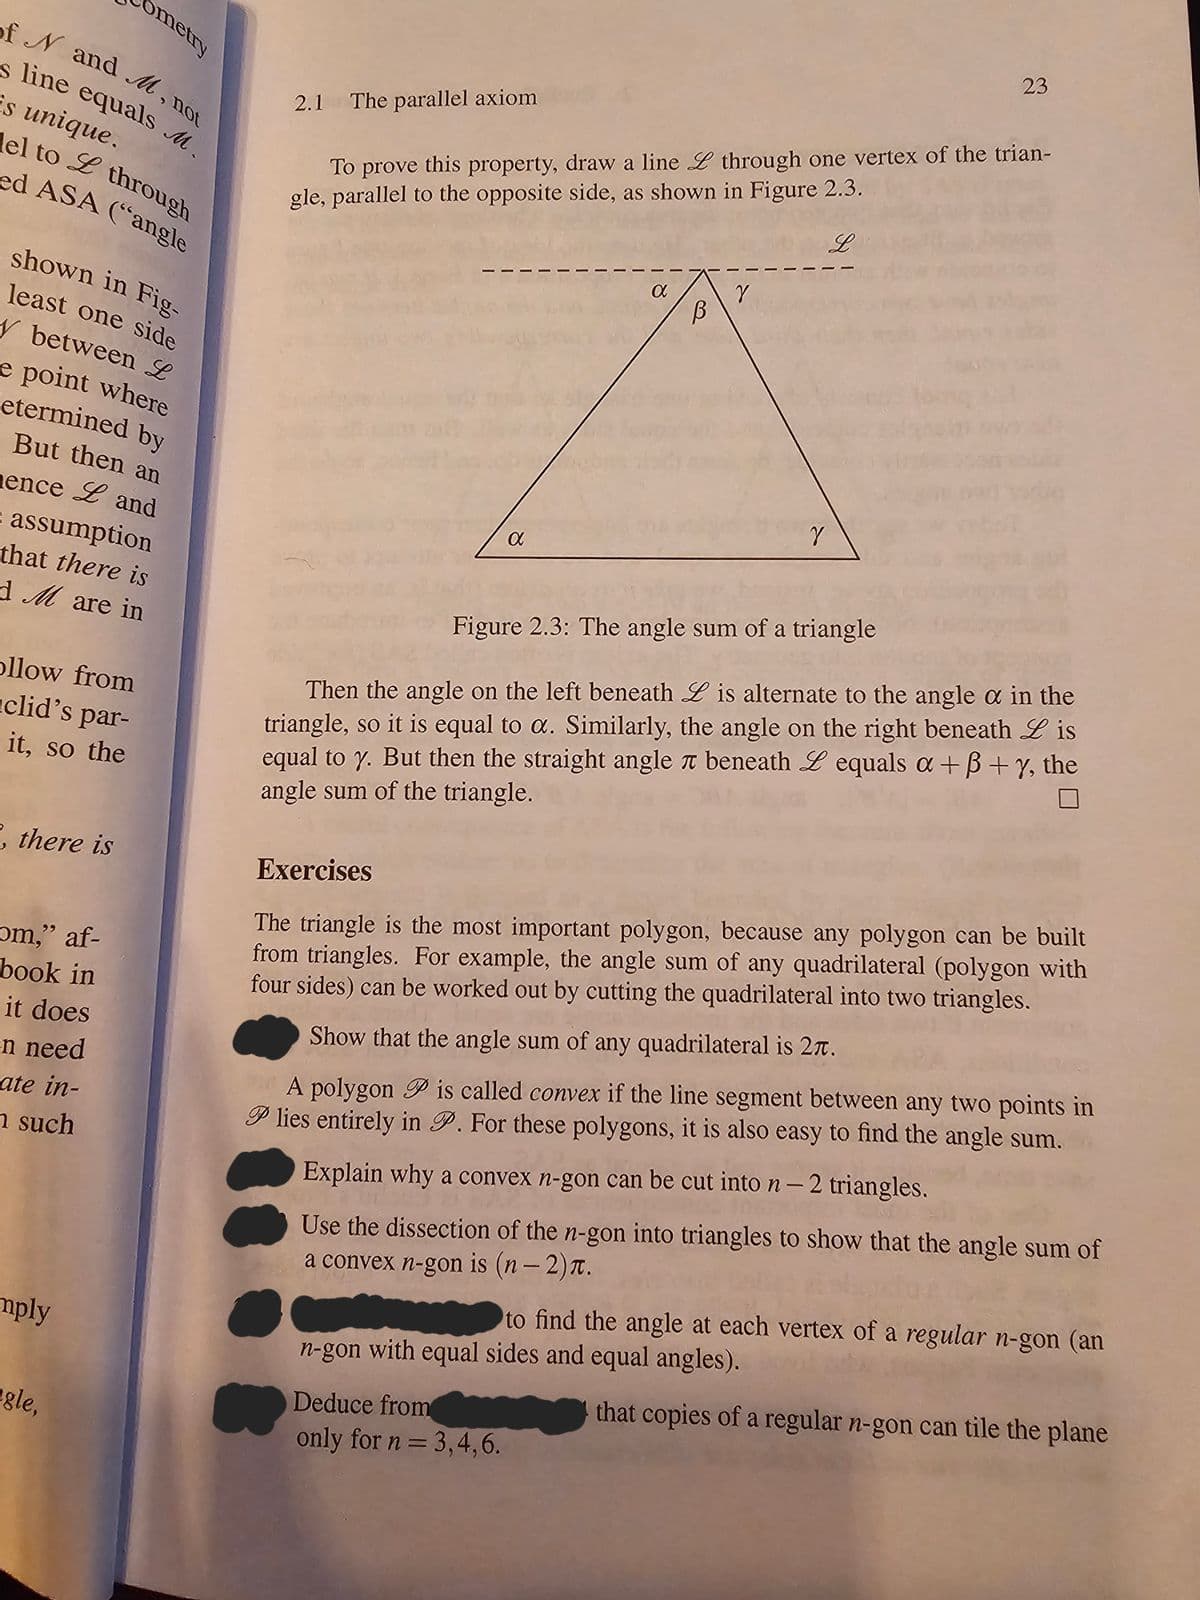 ometry
of N and M, not
s line equals M.
is unique.
el to L through
ed ASA ("angle
shown in Fig-
least one side
y between L
e point where
etermined by
But then an
ence Land
assumption
that there is
d M are in
ollow from
clid's par-
it, so the
, there is
om," af-
book in
it does
en need
ate in-
n such
mply
gle,
2.1 The parallel axiom
To prove this property, draw a line L through one vertex of the trian-
gle, parallel to the opposite side, as shown in Figure 2.3.
L
a
a
В
Deduce from
only for n = 3,4,6.
Y
23
Y
Figure 2.3: The angle sum of a triangle
Then the angle on the left beneath L is alternate to the angle a in the
triangle, so it is equal to a. Similarly, the angle on the right beneath Lis
equal to y. But then the straight angle л beneath Lequals a+B+y, the
angle sum of the triangle.
Exercises
The triangle is the most important polygon, because any polygon can be built
from triangles. For example, the angle sum of any quadrilateral (polygon with
four sides) can be worked out by cutting the quadrilateral into two triangles.
Show that the angle sum of any quadrilateral is 27.
A polygon P is called convex if the line segment between any two points in
P lies entirely in P. For these polygons, it is also easy to find the angle sum.
Explain why a convex n-gon can be cut into n - 2 triangles.
Use the dissection of the n-gon into triangles to show that the angle sum of
a convex n-gon is (n − 2).
to find the angle at each vertex of a regular n-gon (an
n-gon with equal sides and equal angles).
that copies of a regular n-gon can tile the plane